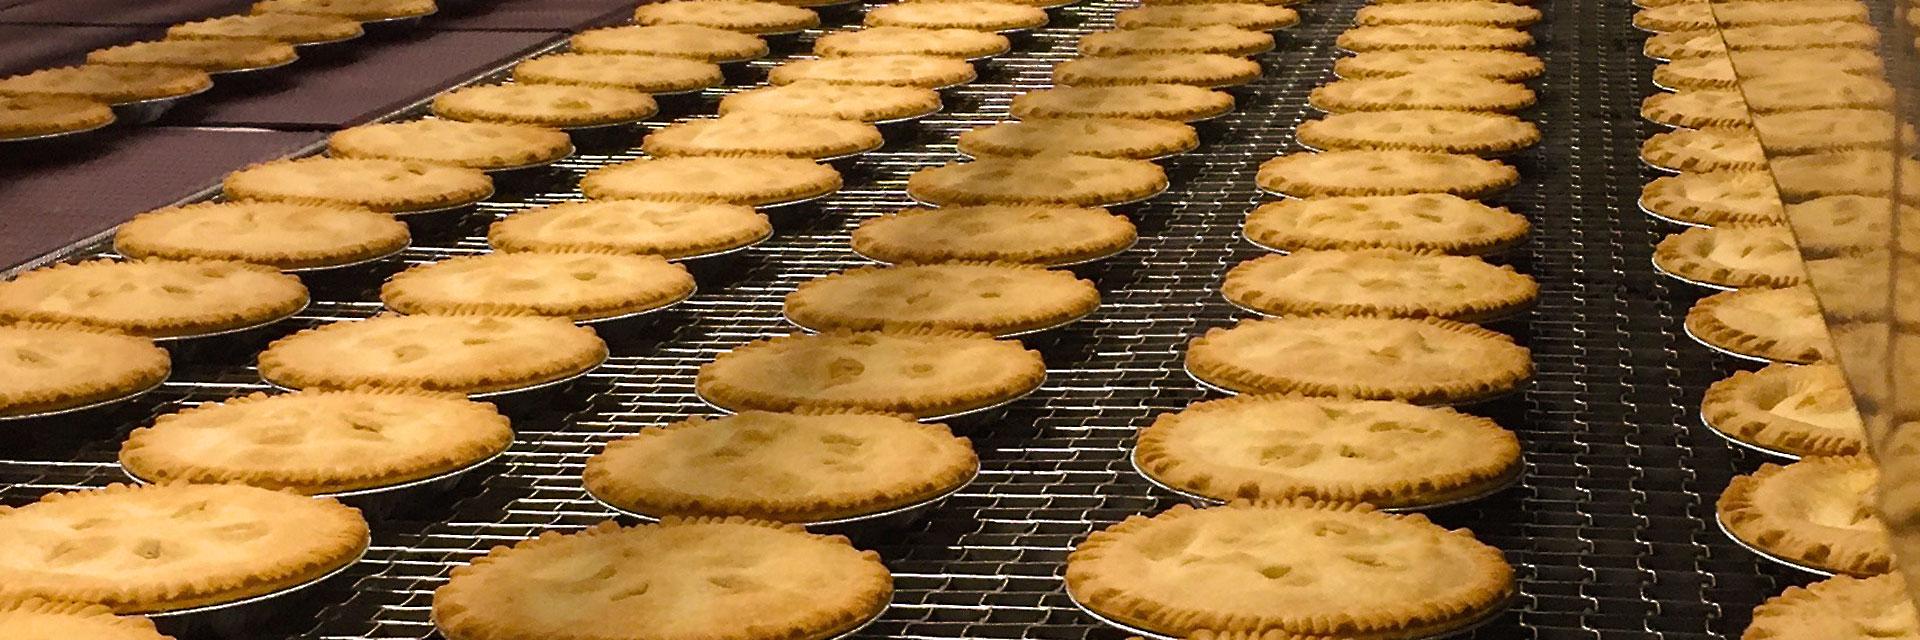 Apple Valley Pies - Canada's largest pie manufacturer